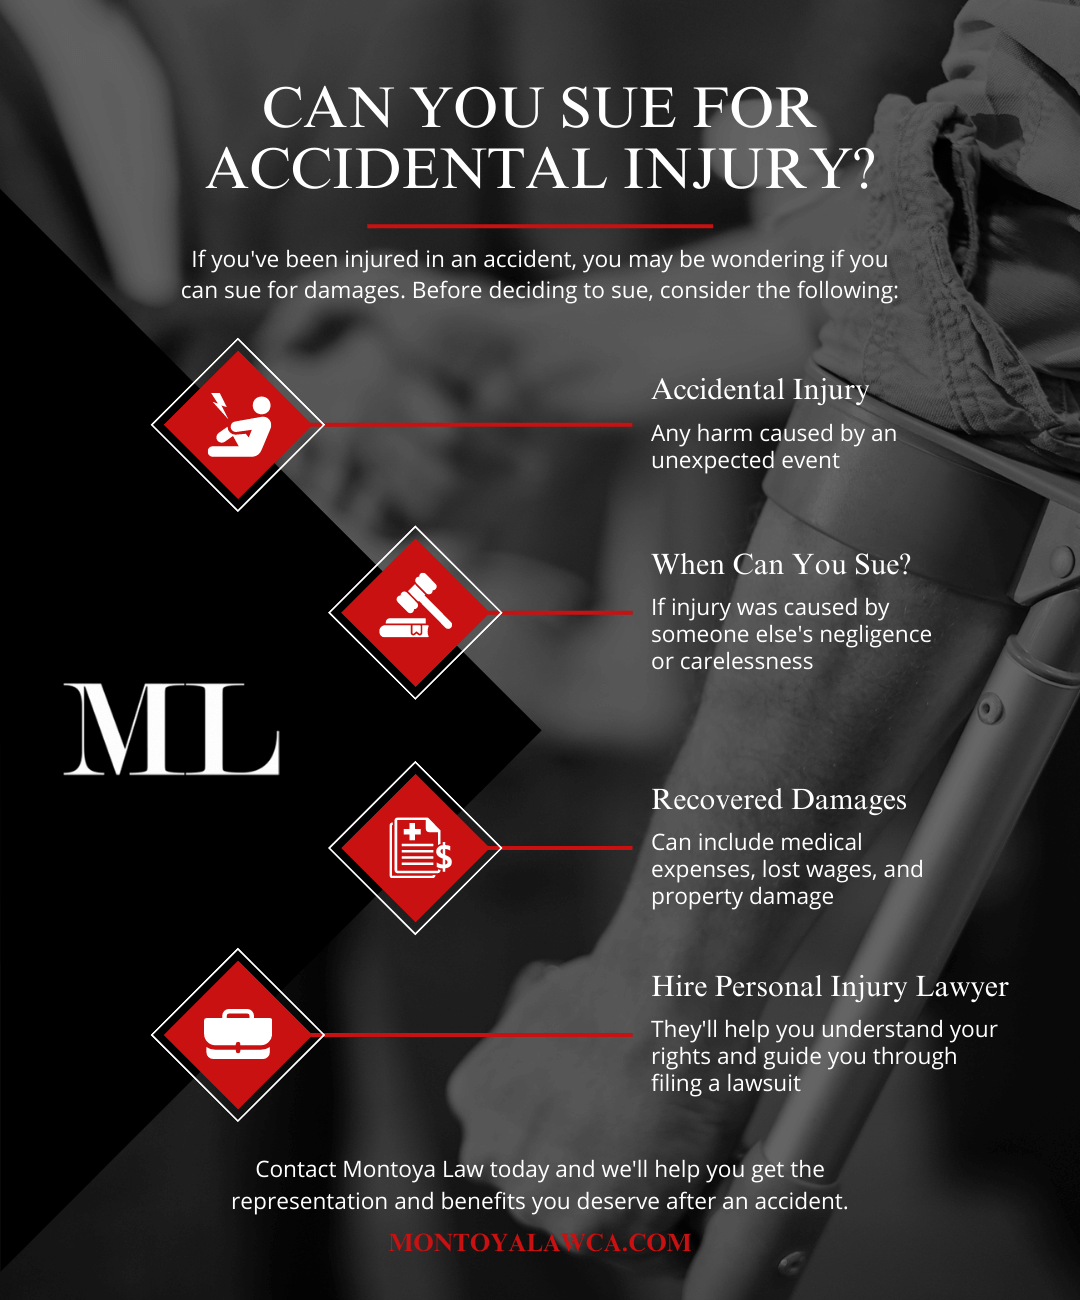 M37918 - Montoya Law_Infographic - Can You Sue for Accidental Injury (1).png